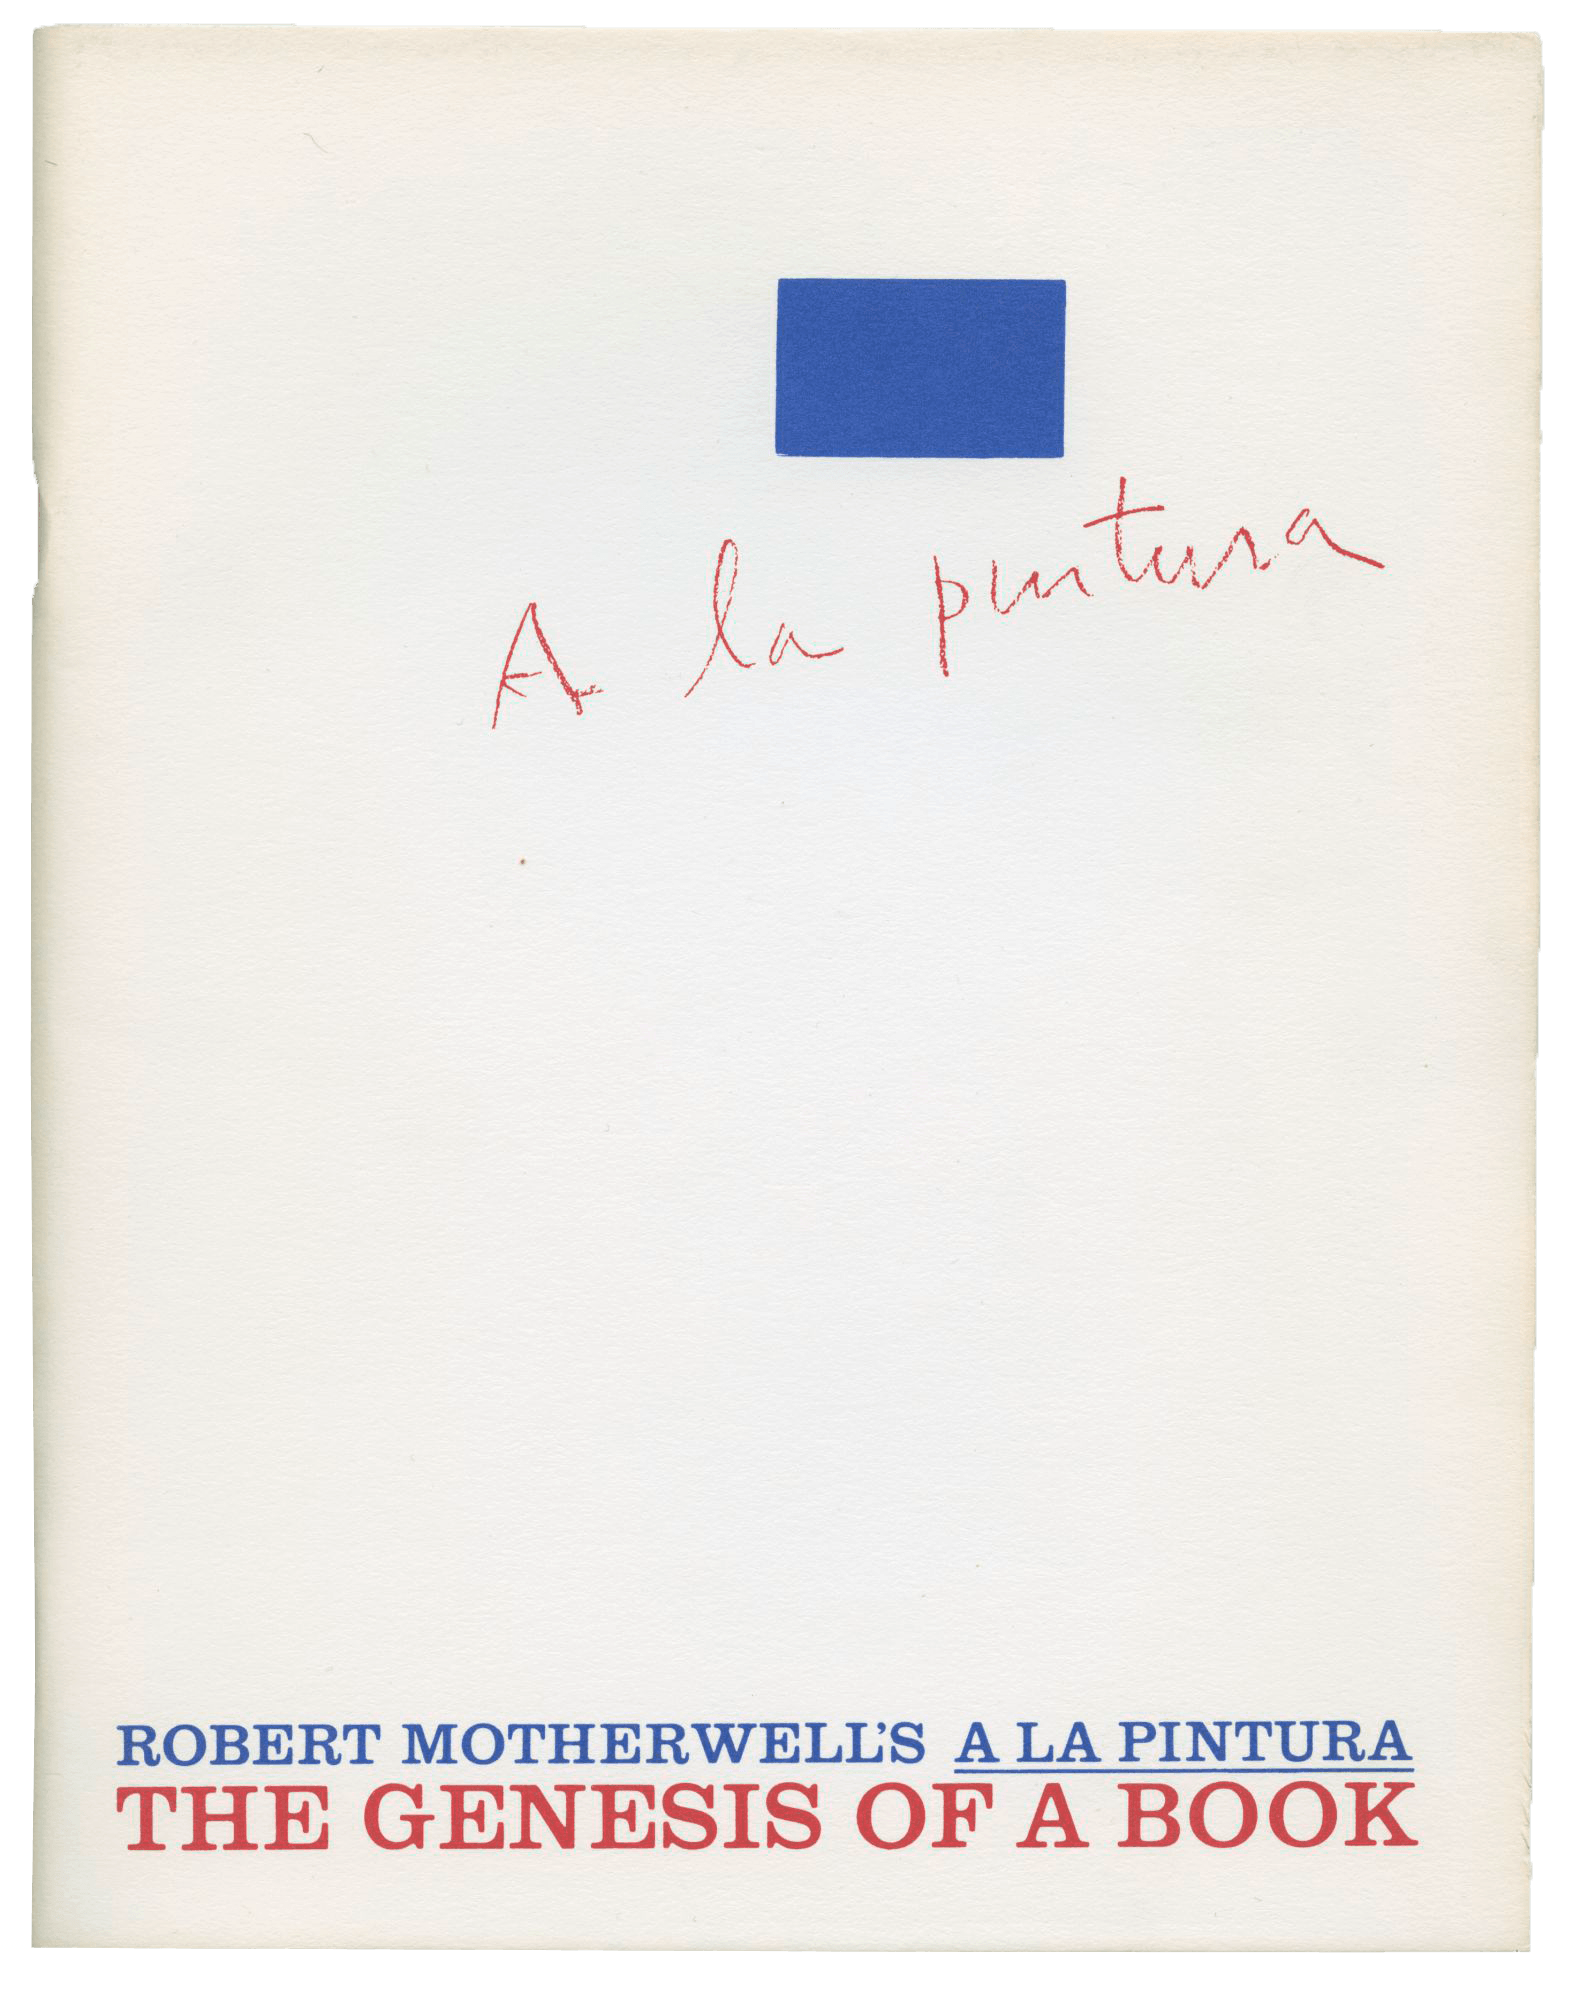 A La Pintura Exhibition Catalogue, 1972. Features blue and red font and a blue rectangle on a white background.